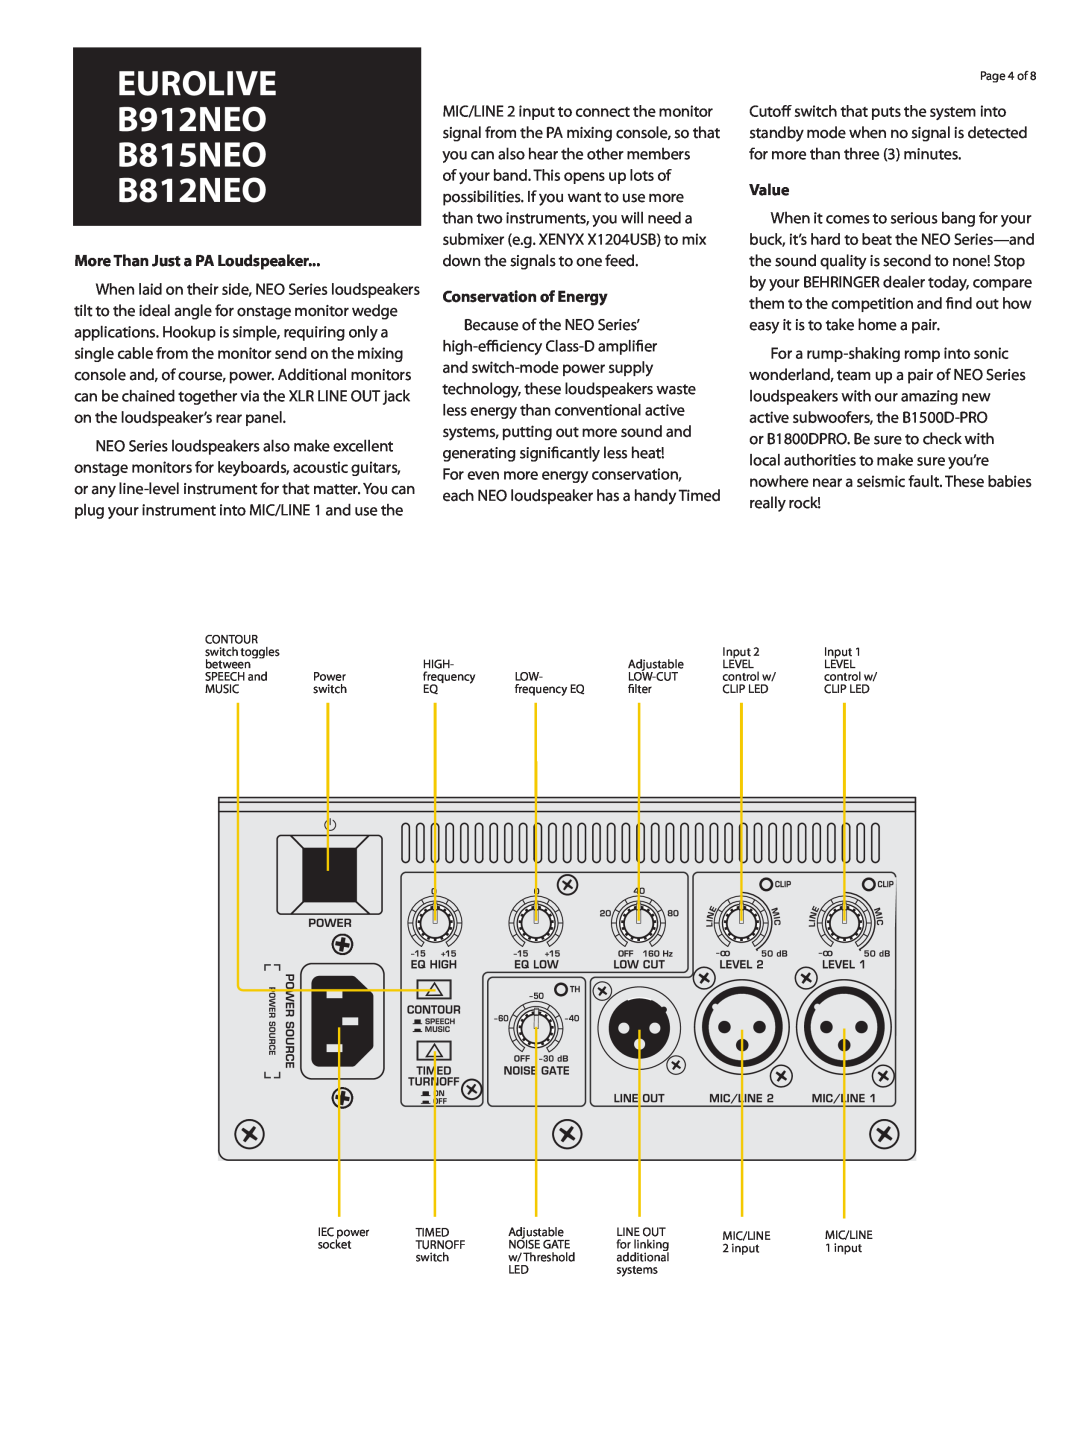 Behringer manual More Than Just a PA Loudspeaker, Conservation of Energy, Value, EUROLIVE B912NEO B815NEO B812NEO 